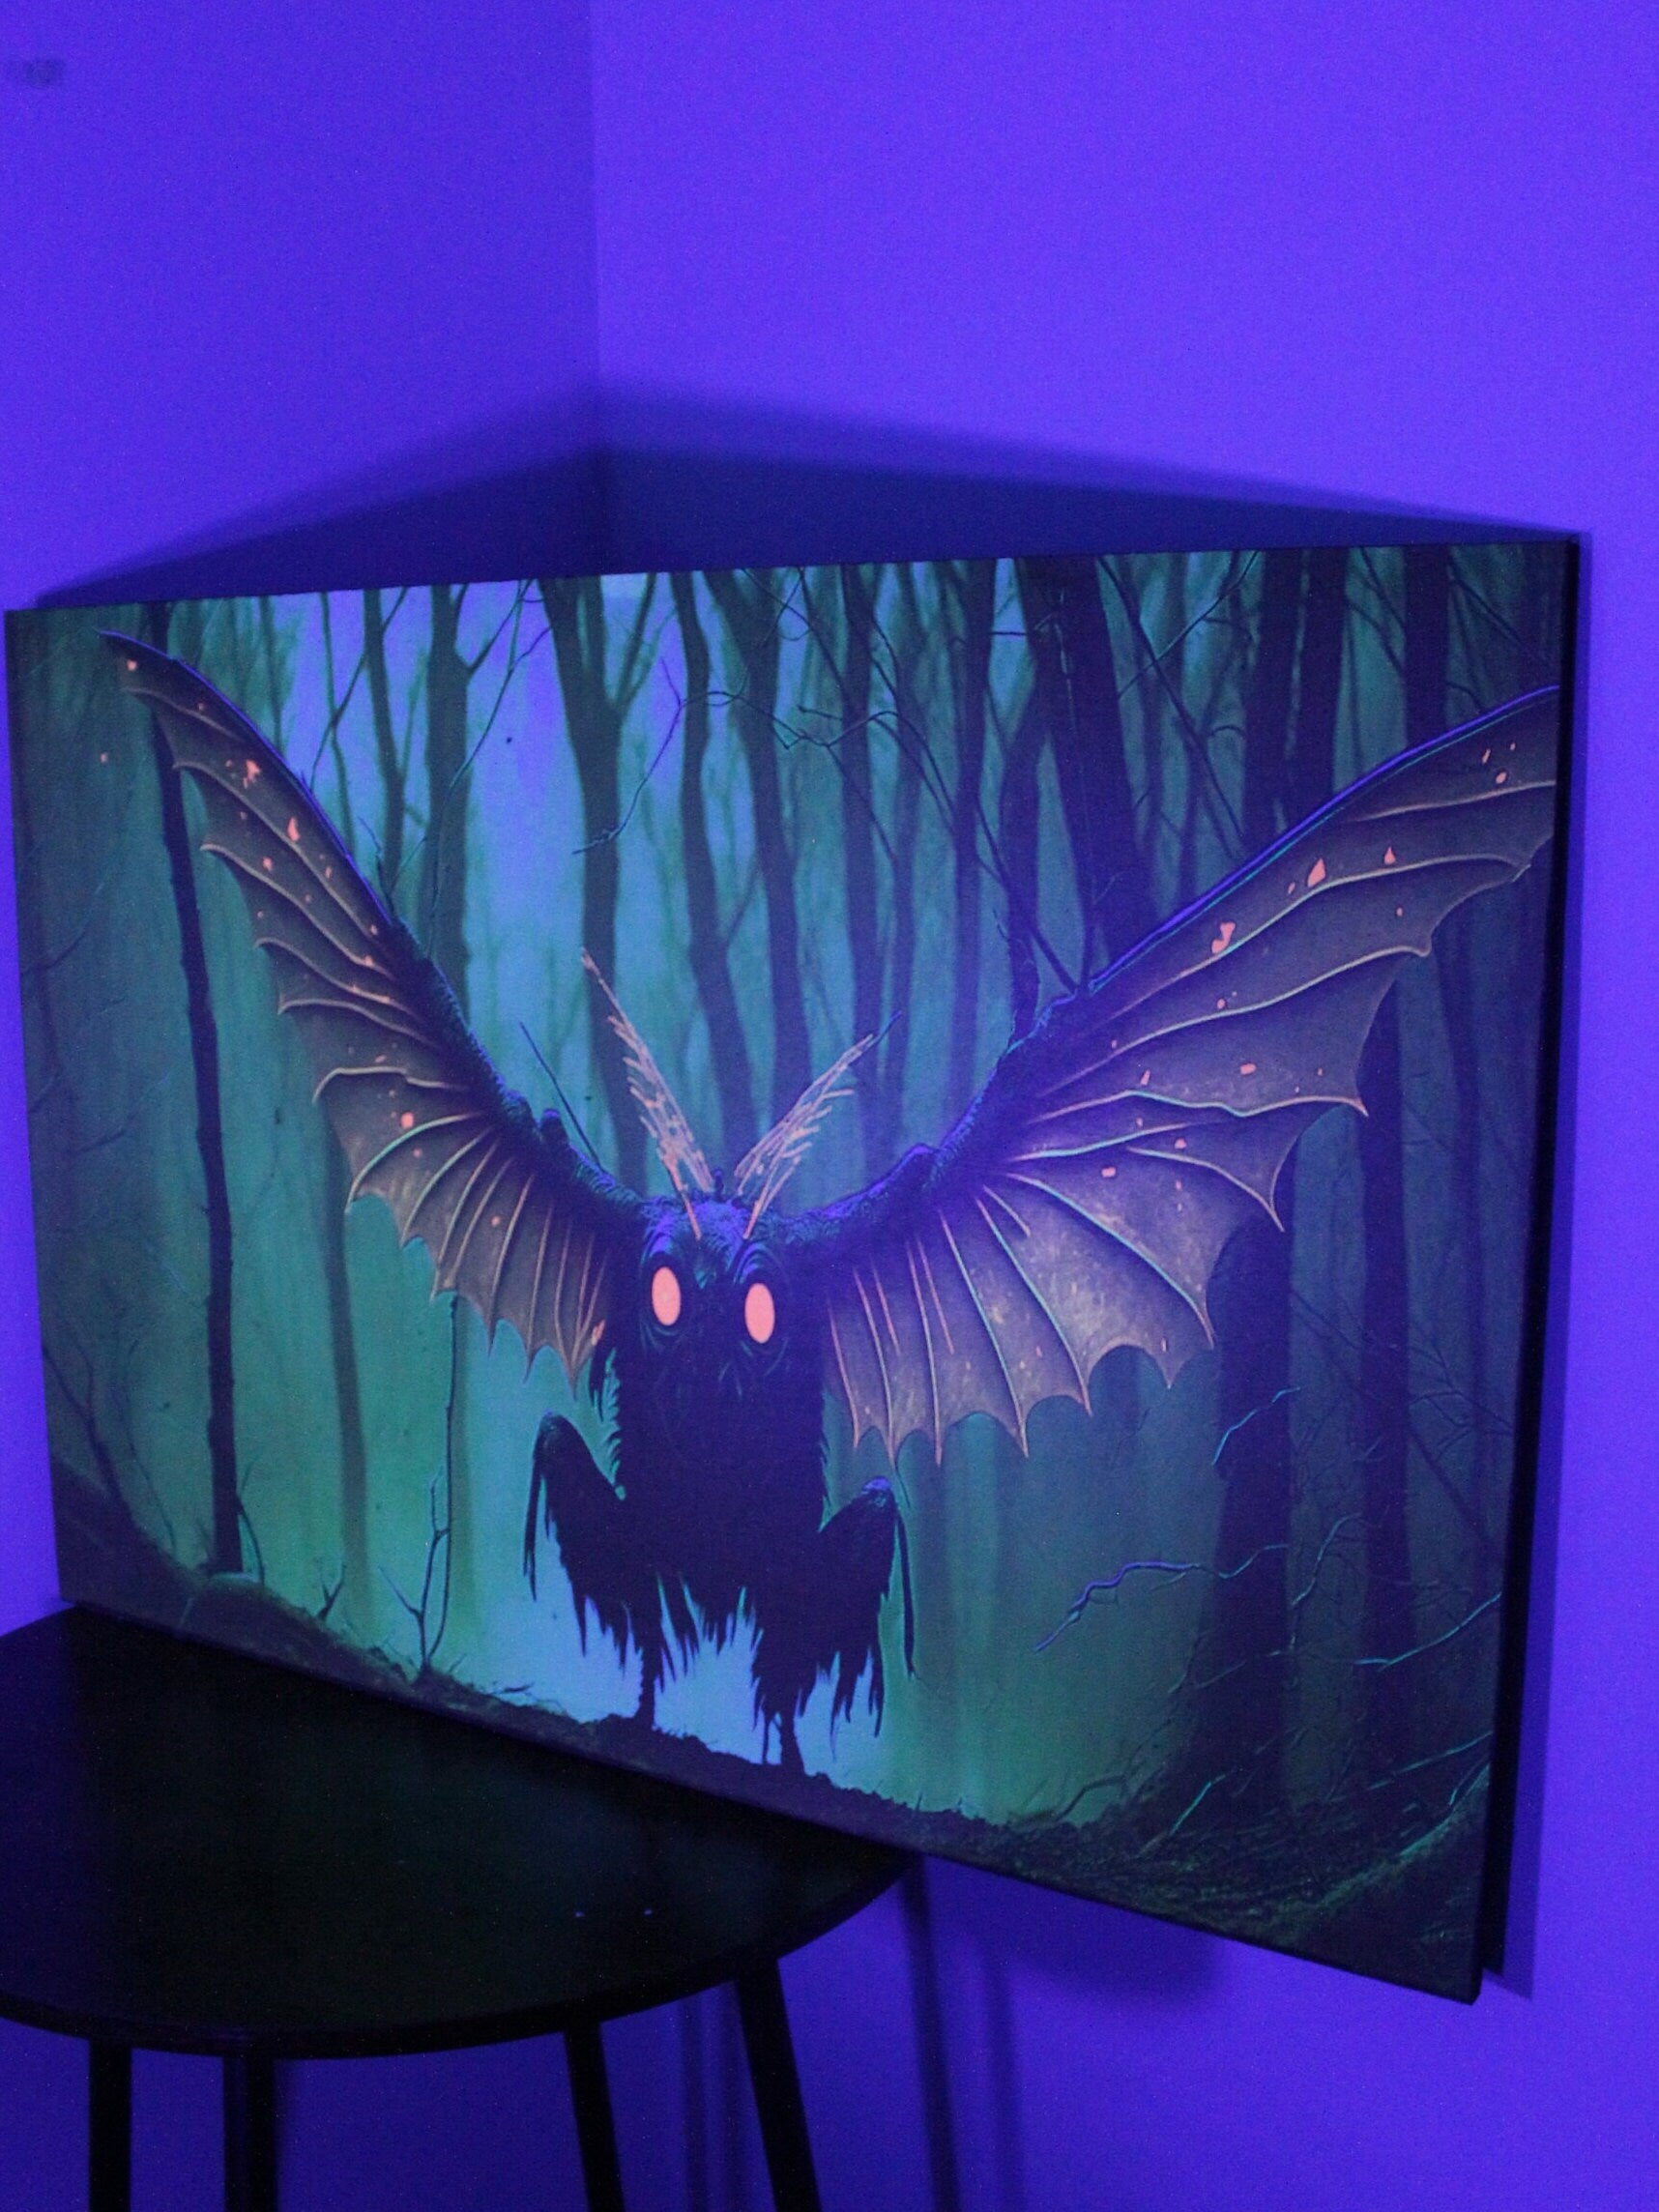 Mothman Moth man Cryptid Fluorescent Black Light Halloween Spooky Cryptic Ultraviolet Putt Putt Haunted House Outdoor Funhouse Decor Printed